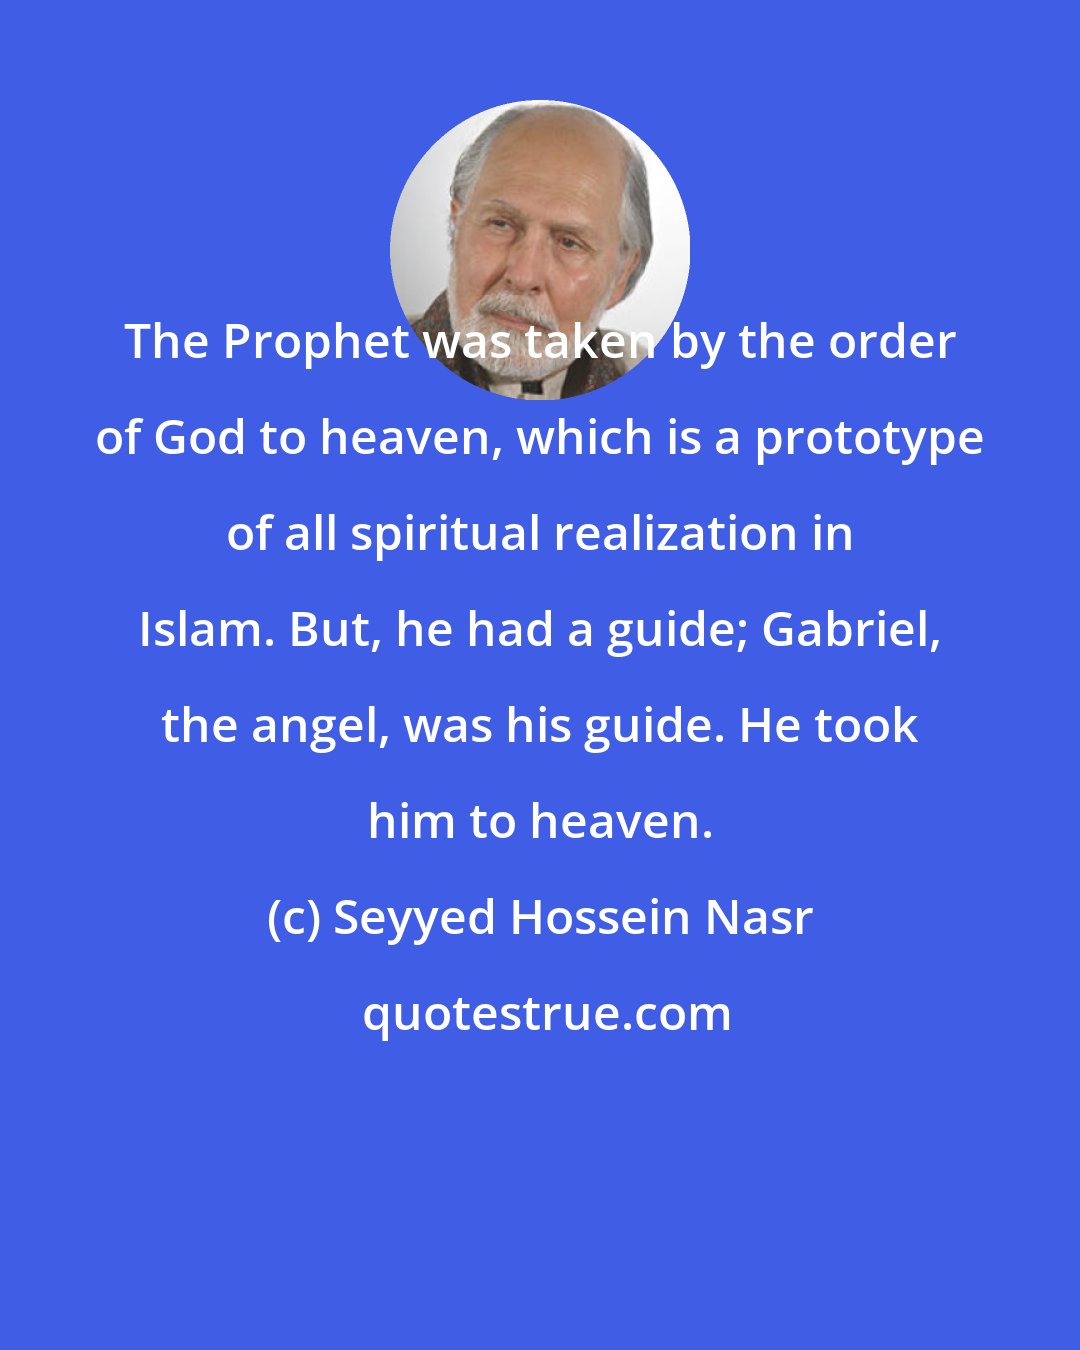 Seyyed Hossein Nasr: The Prophet was taken by the order of God to heaven, which is a prototype of all spiritual realization in Islam. But, he had a guide; Gabriel, the angel, was his guide. He took him to heaven.